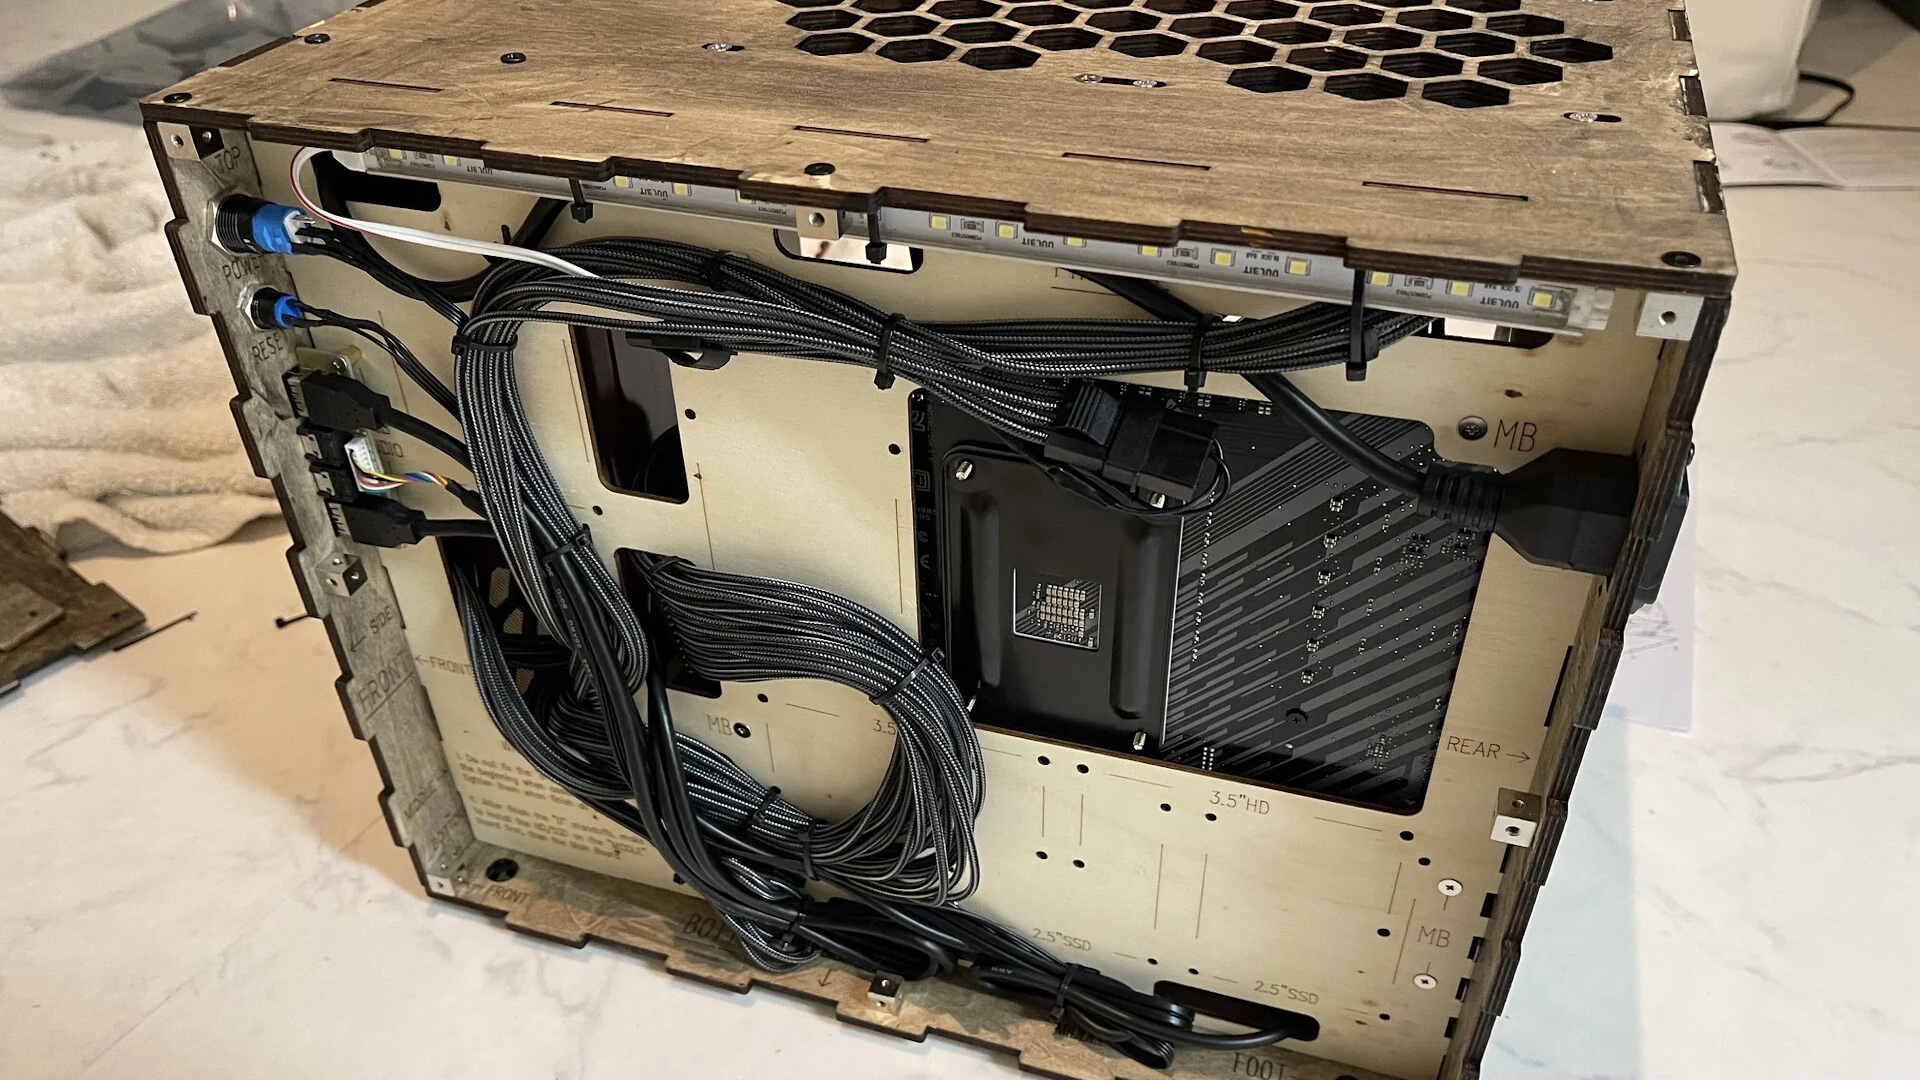 The cable management of the Noctua wooden gaming PC